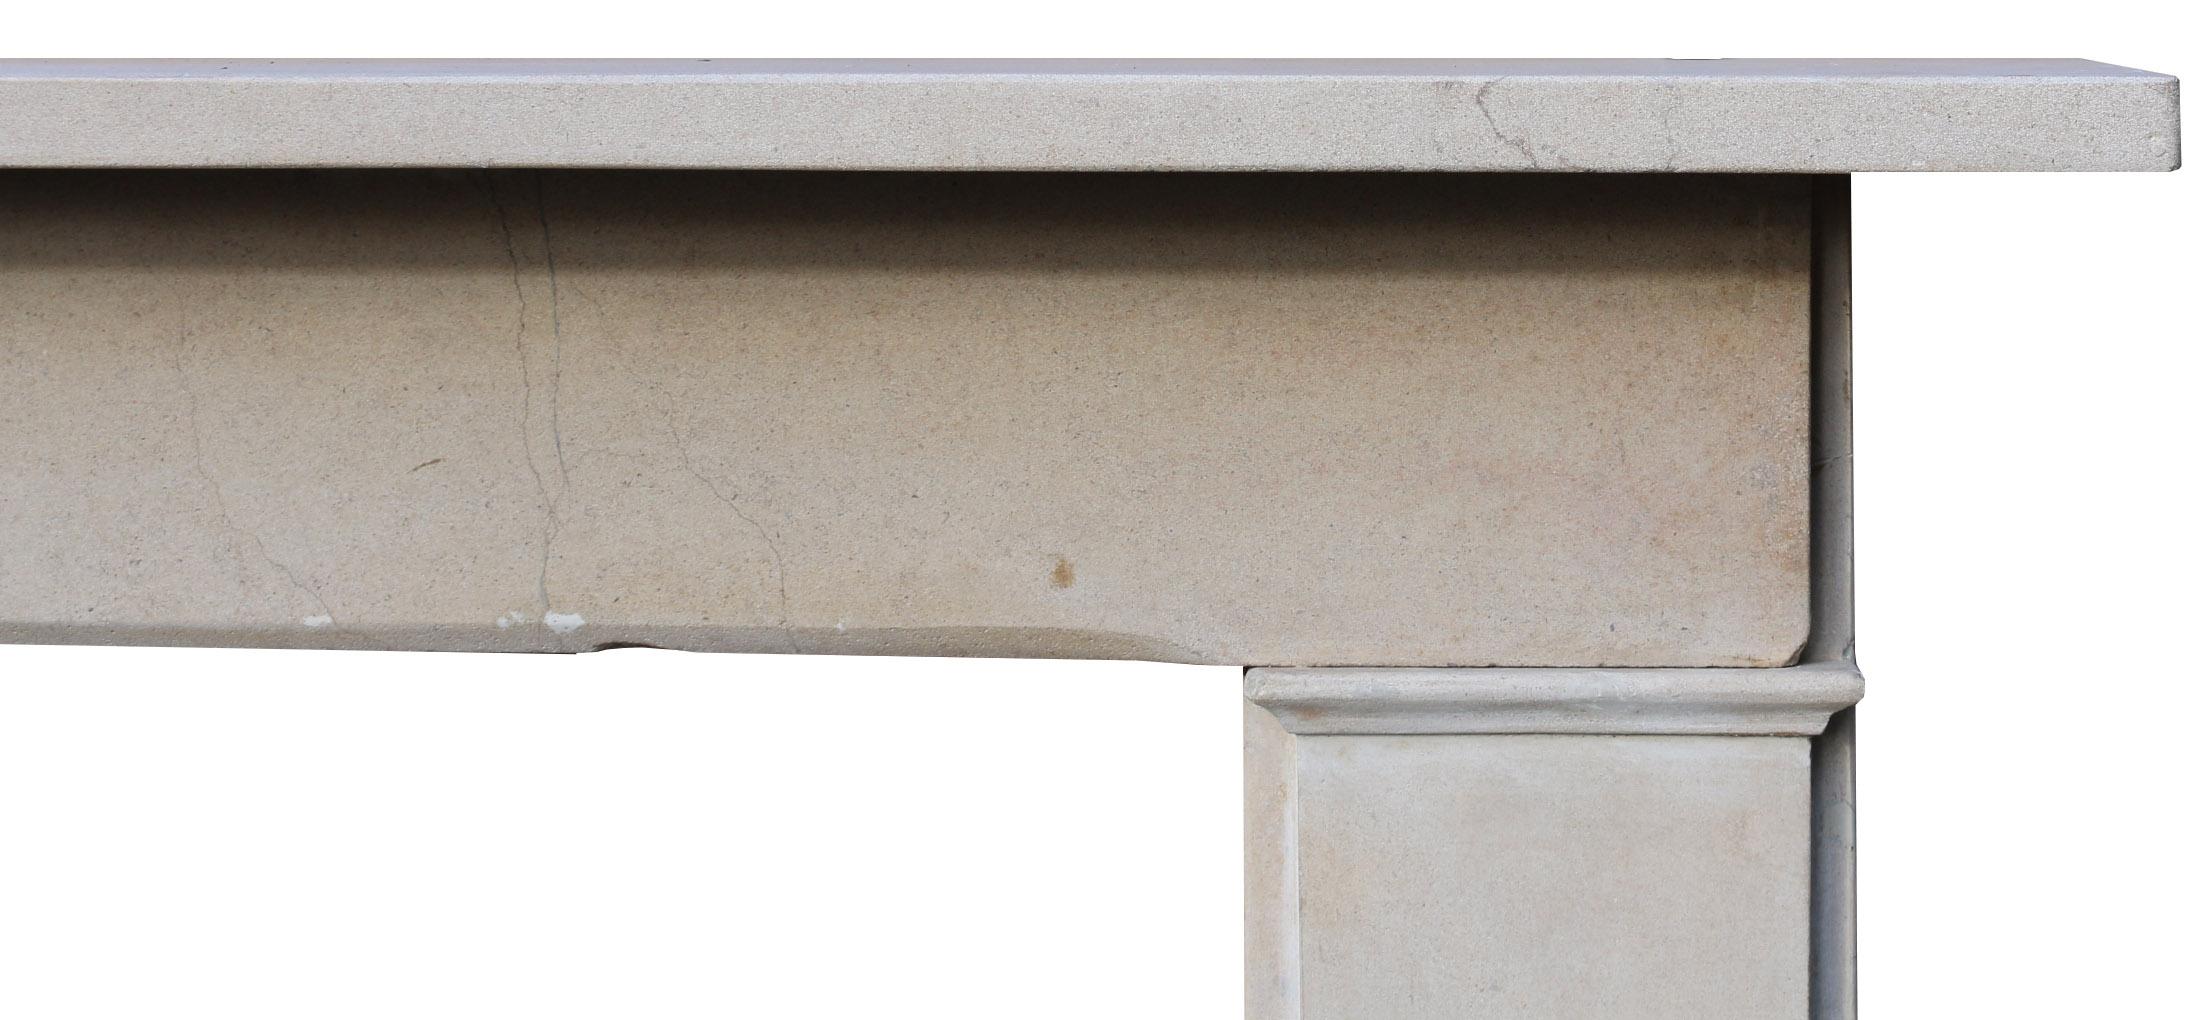 cotswold stone fireplaces